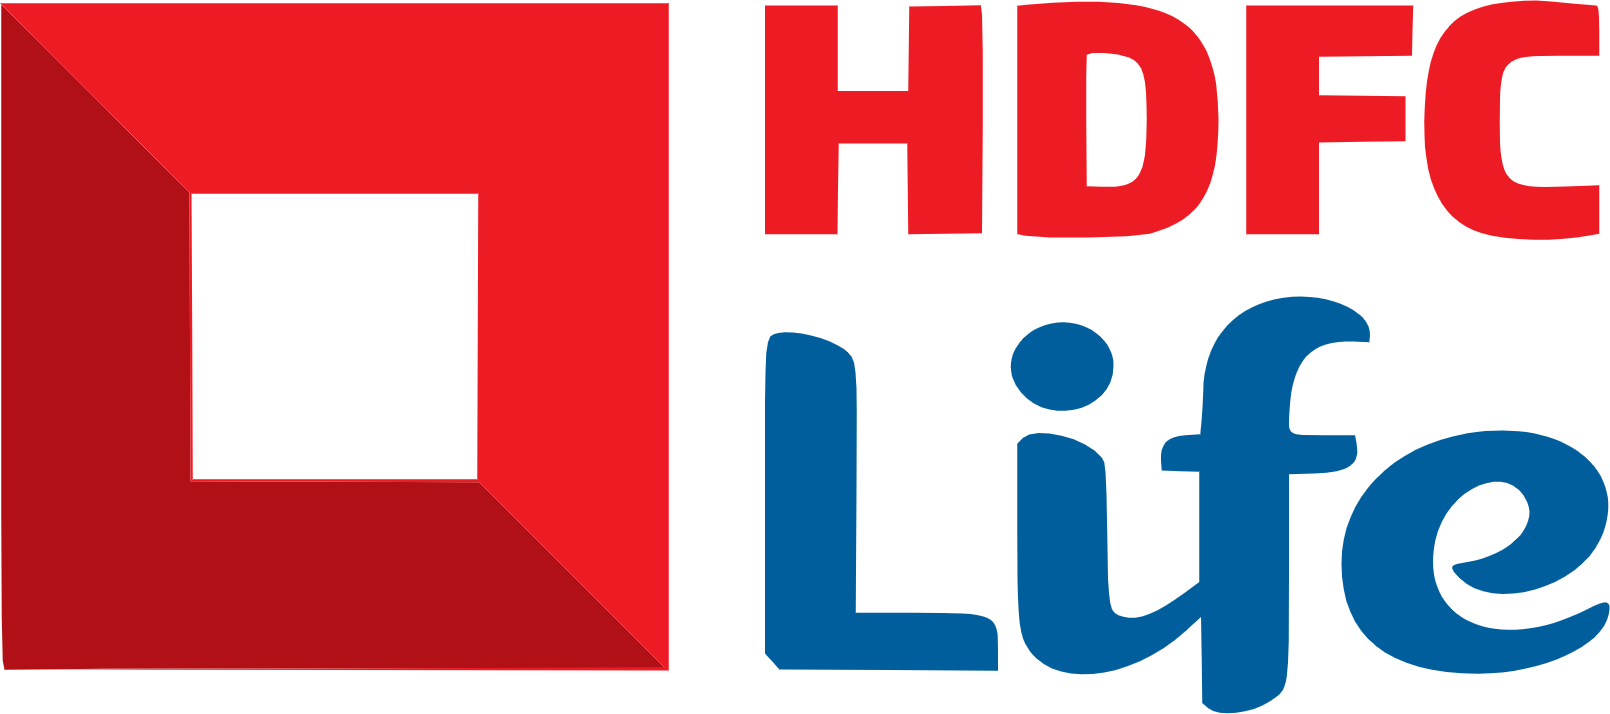 HDFC Life Insurance Company Stocks Live Updates: HDFC Life Insurance Closes at Rs 646.75 with 27,513 Shares Traded, 7-Day Avg Volume at 5,583,938 Shares 